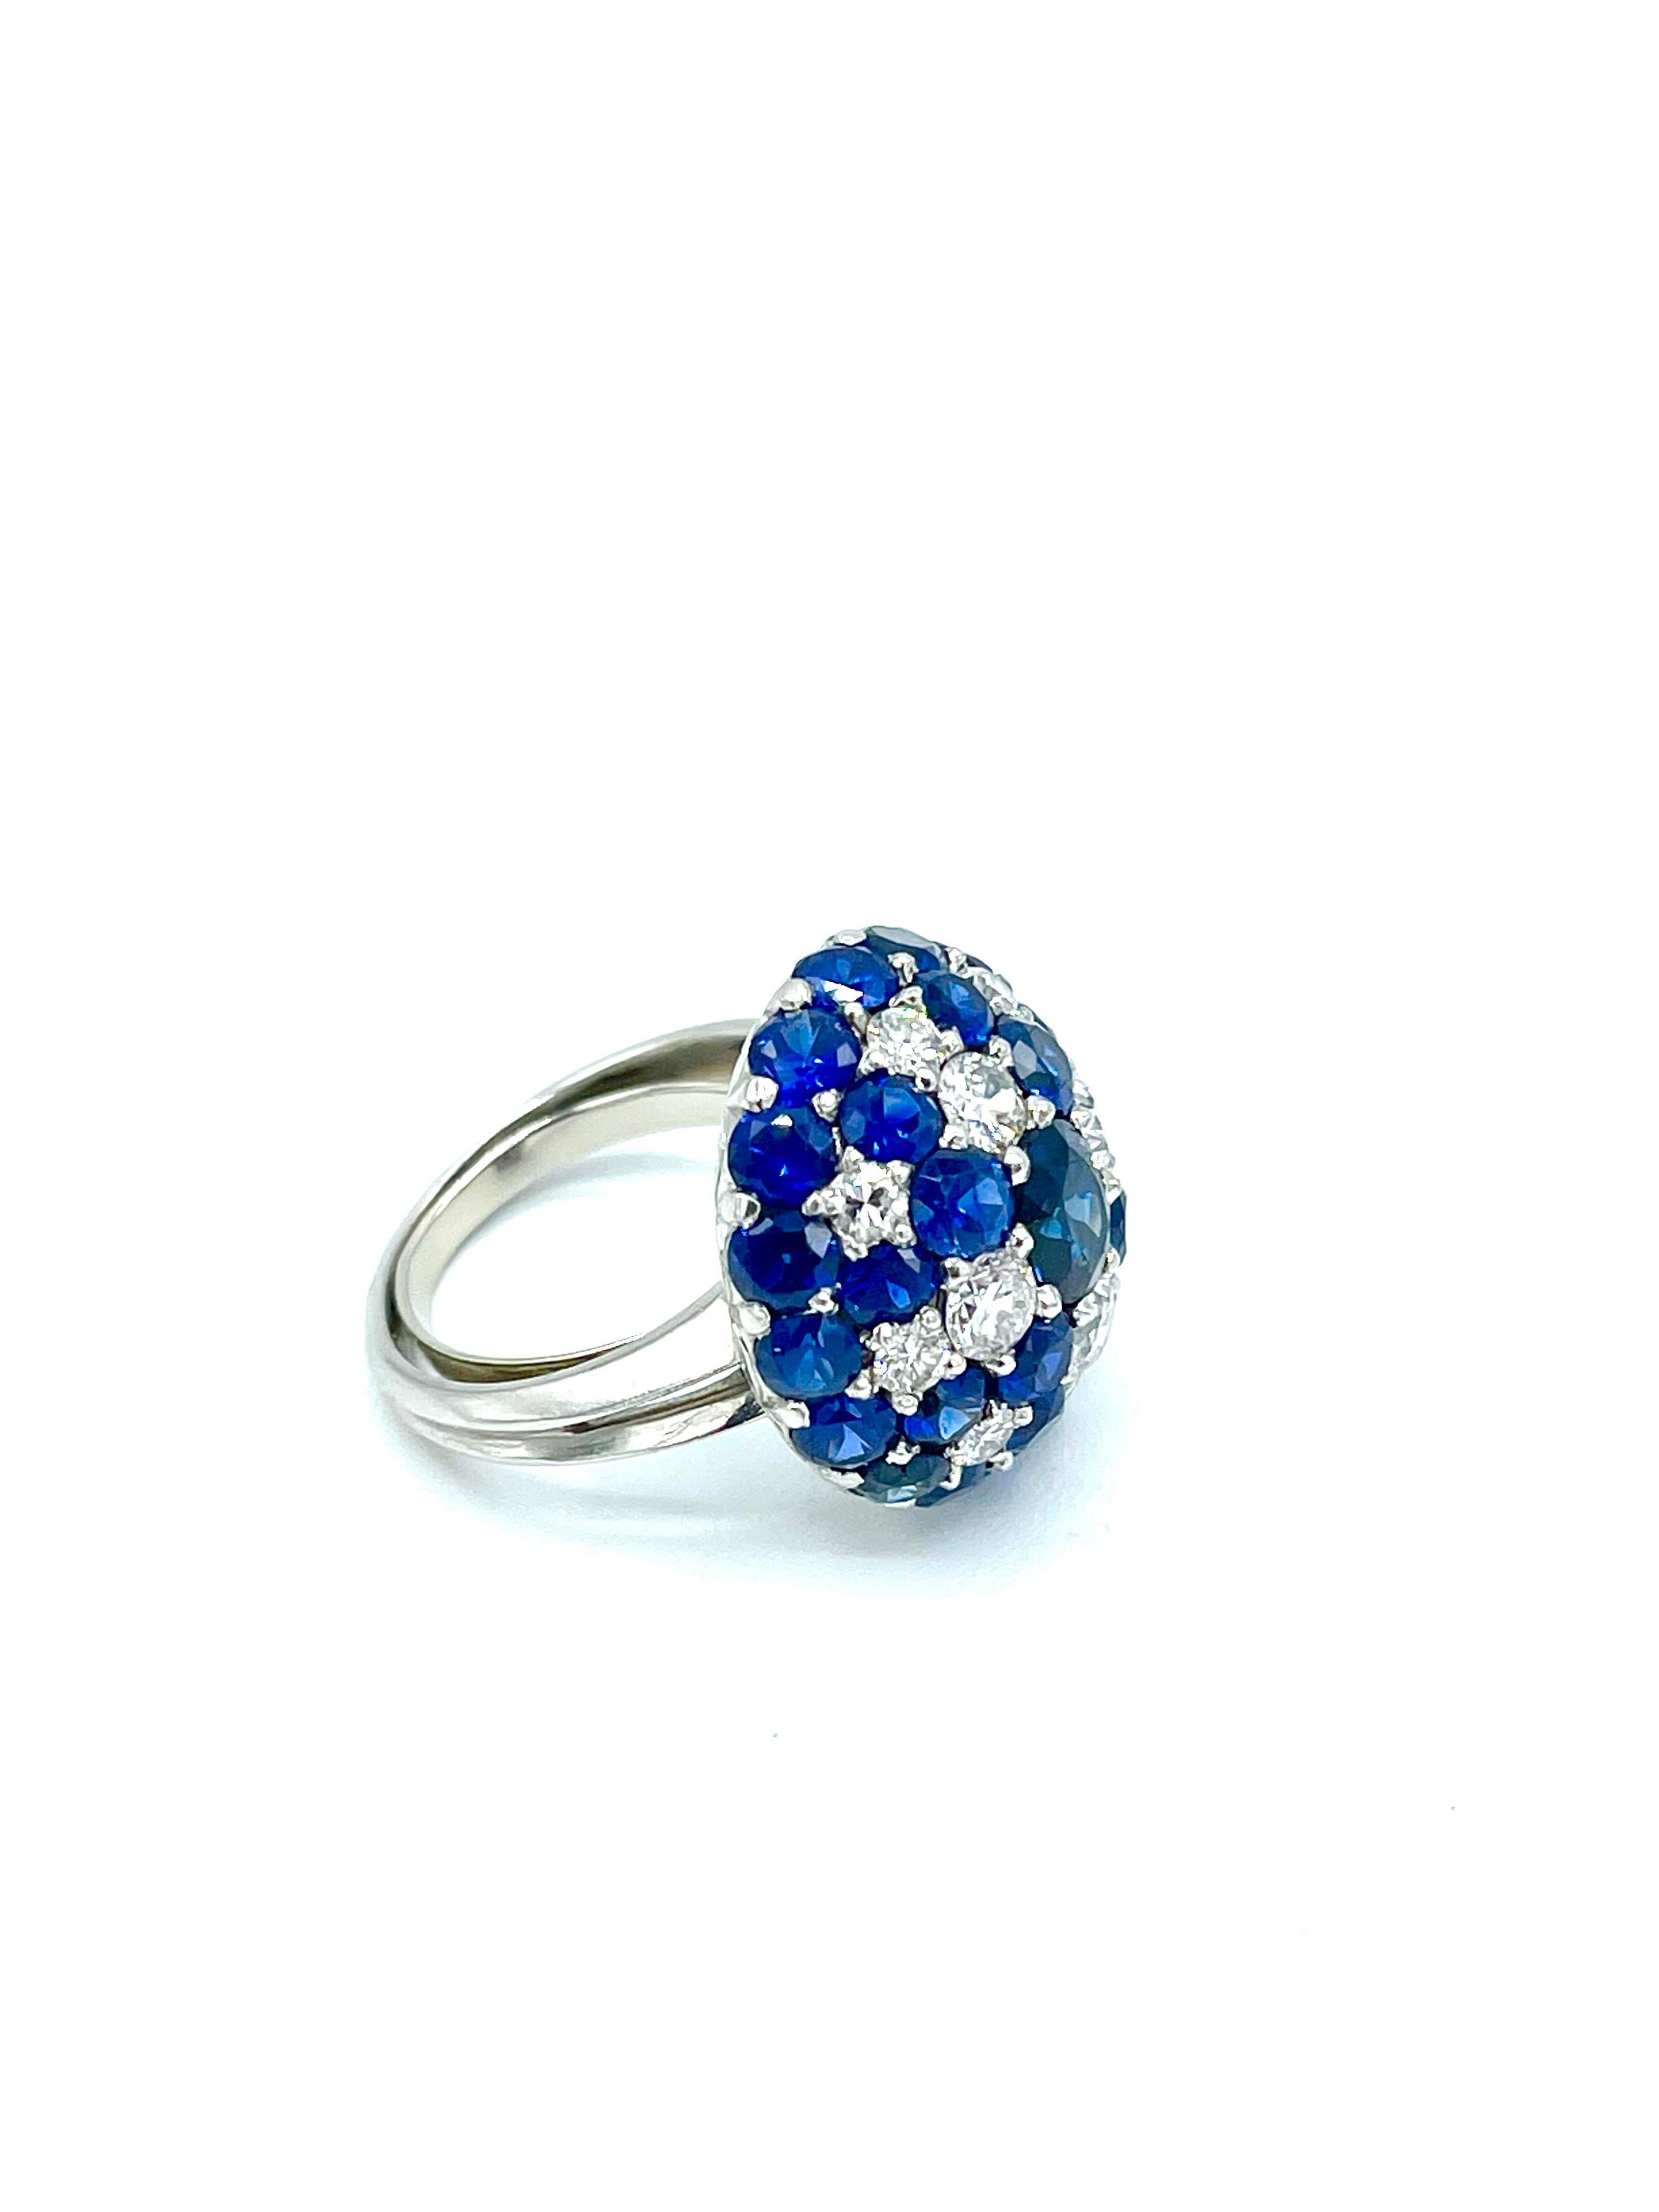 are all sapphires blue